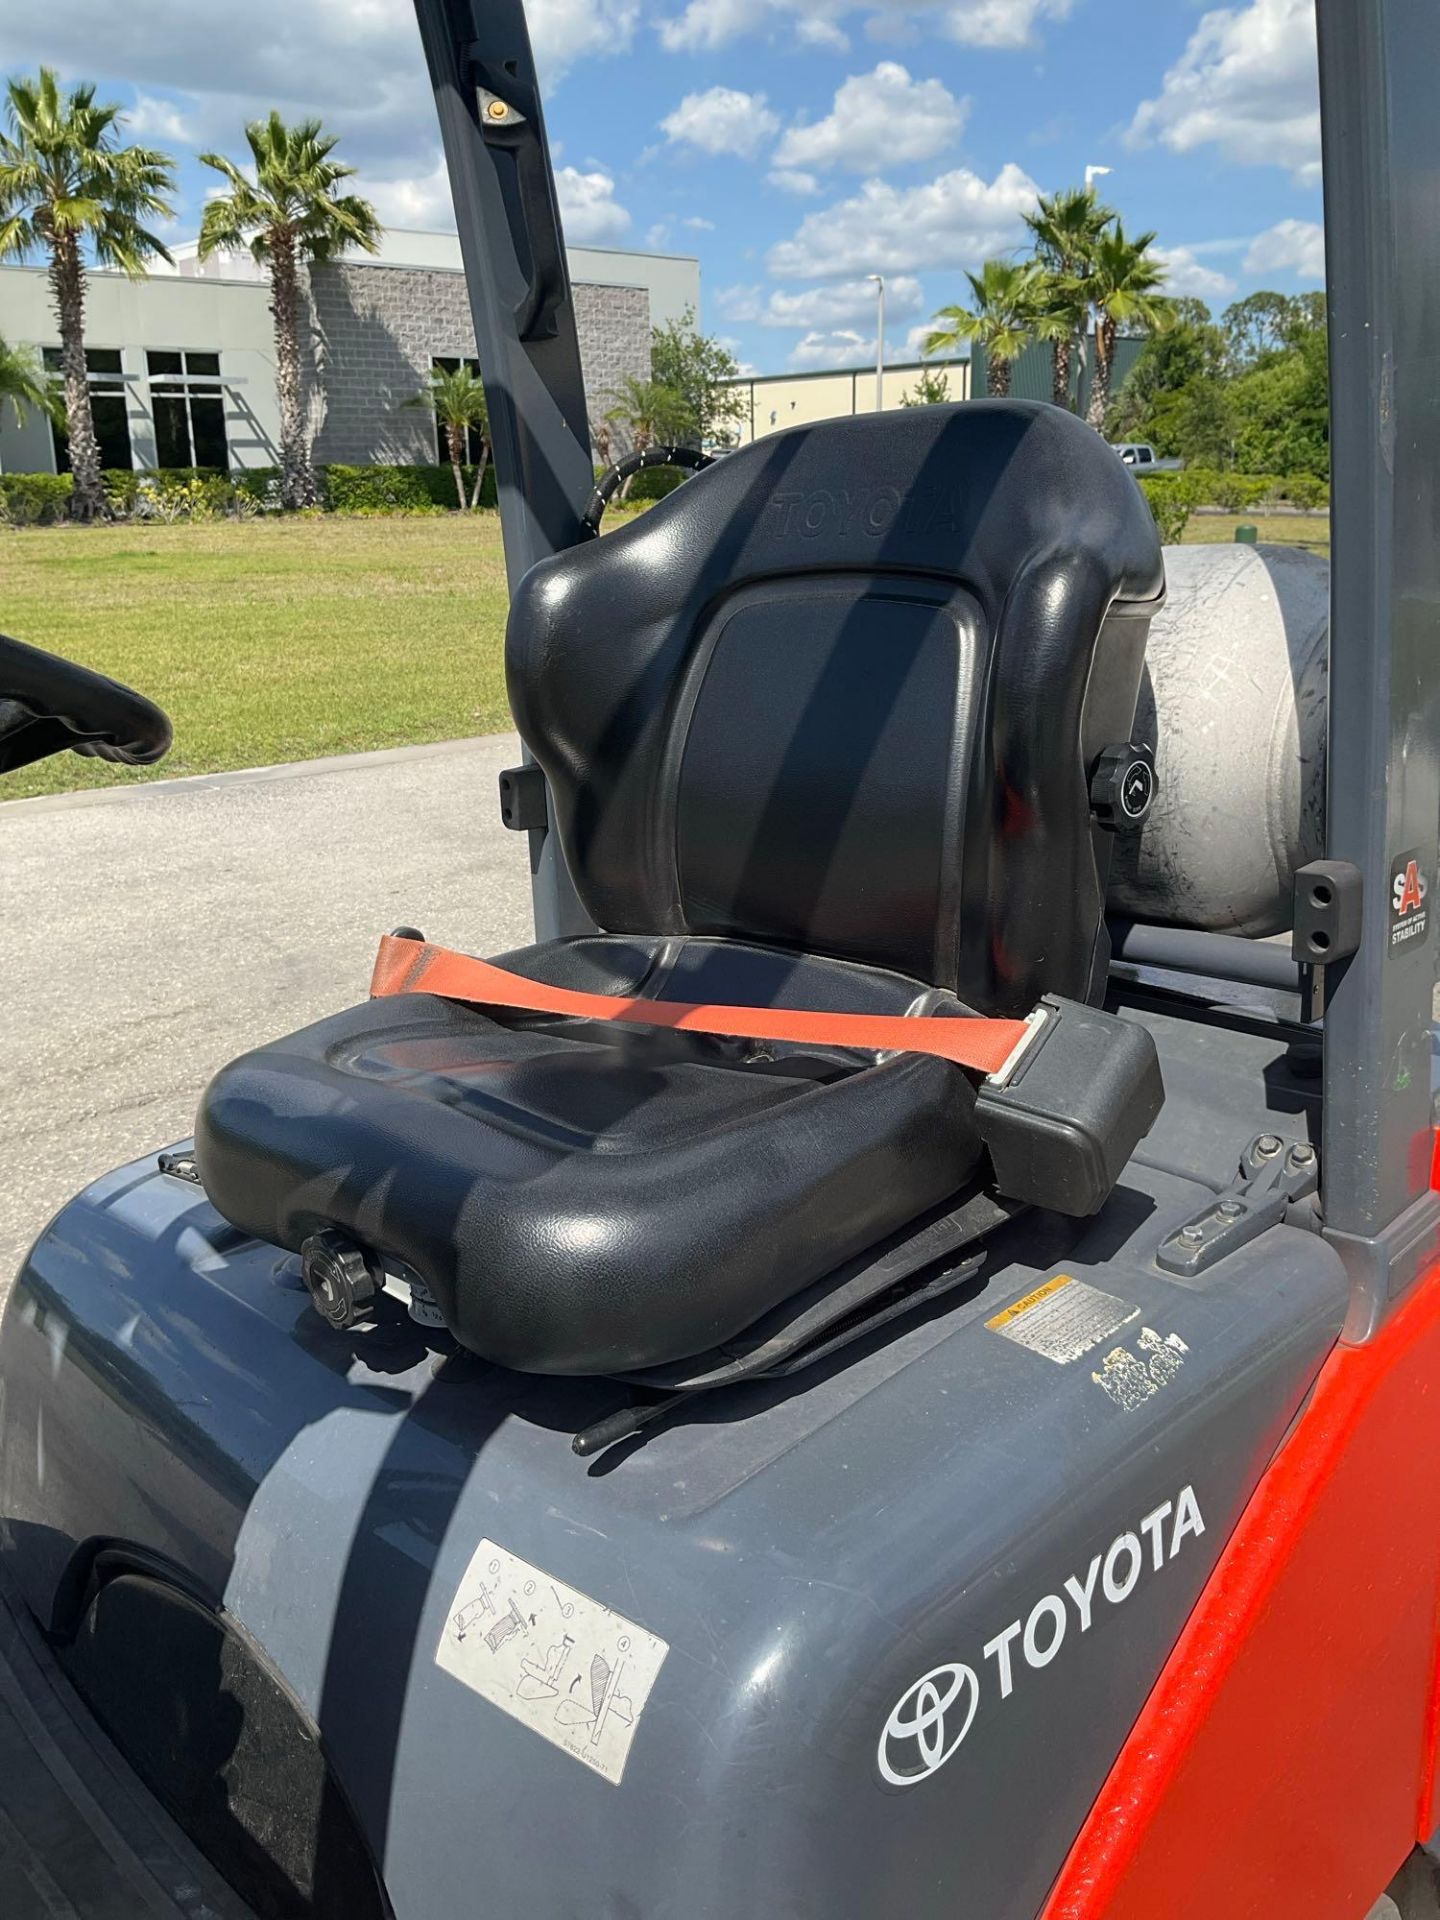 2019 TOYOTA FORKLIFT MODEL 8FGCU15, LP POWERED, APPROX MAX CAPACITY 2500, MAX HEIGHT 189in, TILT, - Image 9 of 12